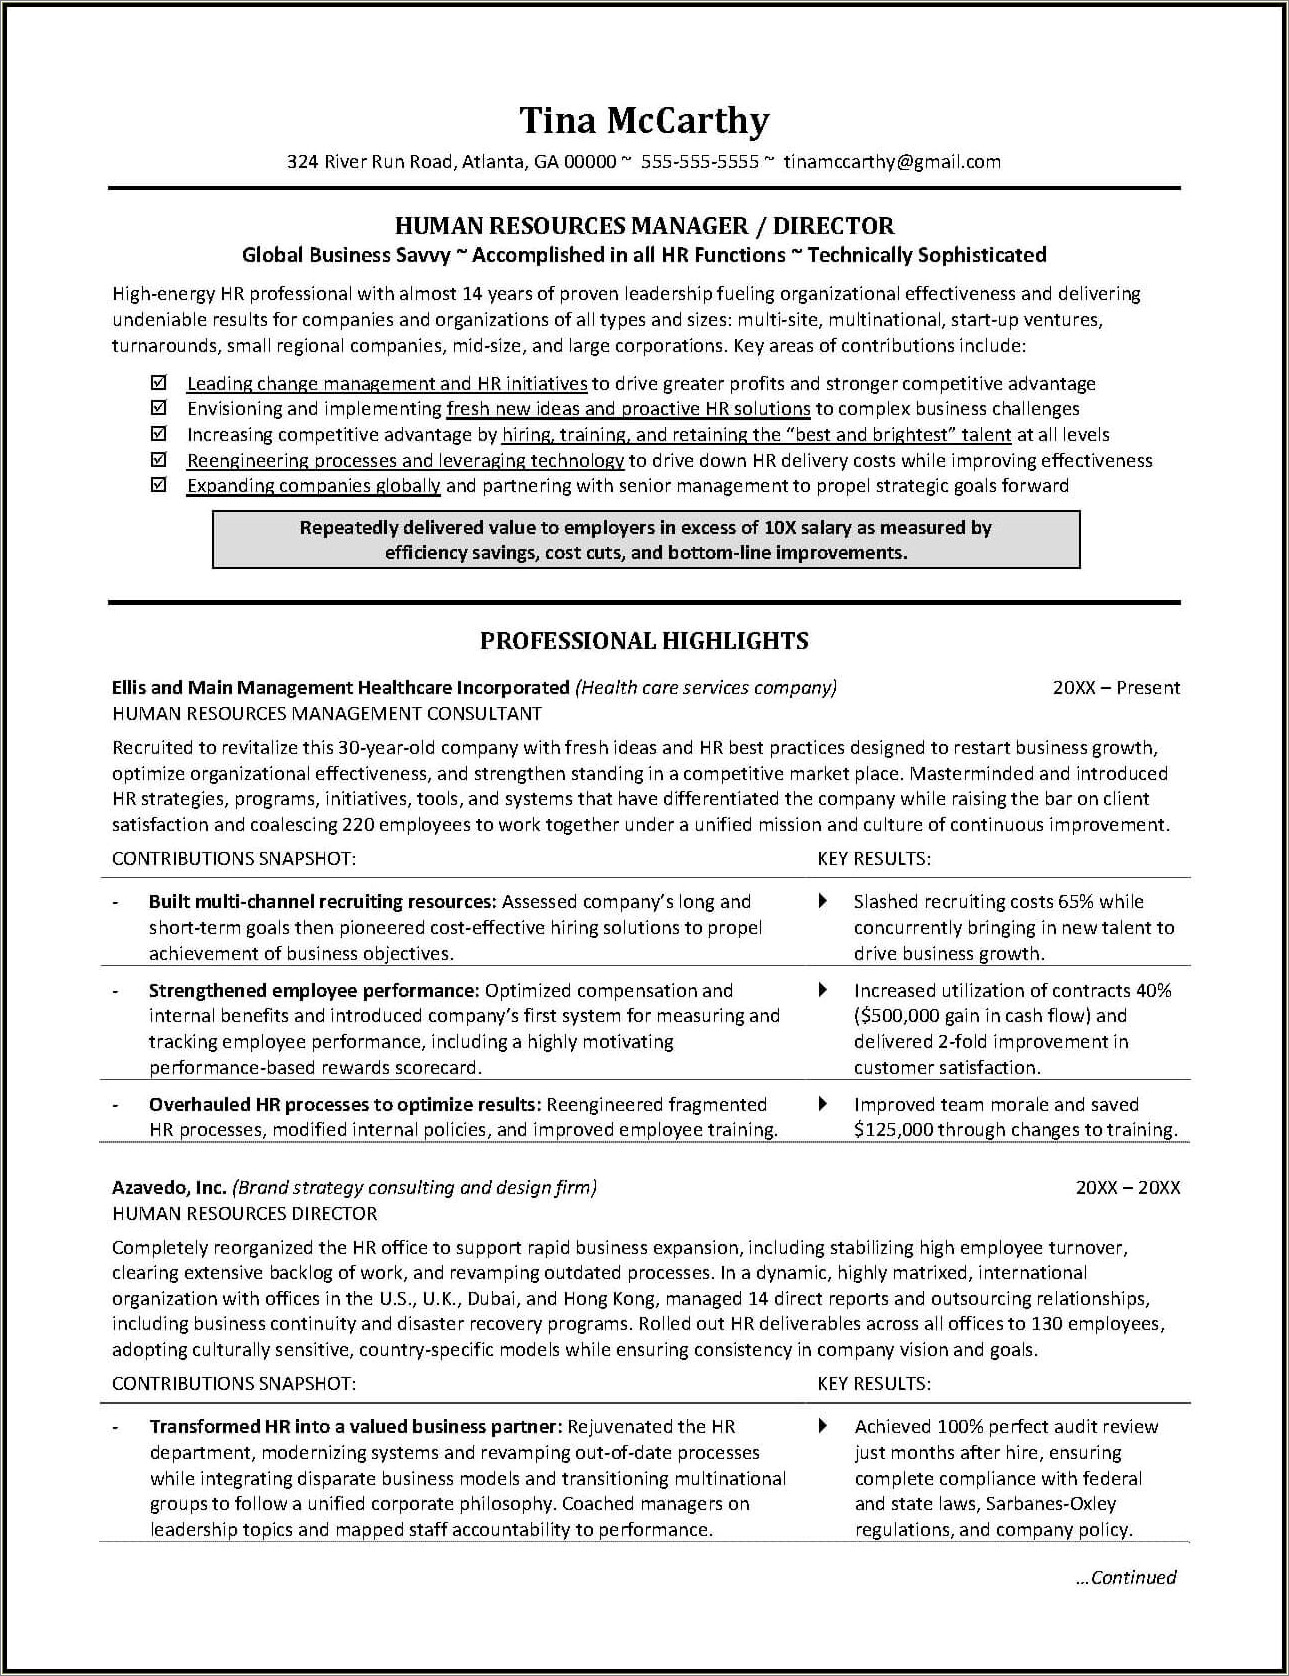 Sample Resume Format For Experienced Hr